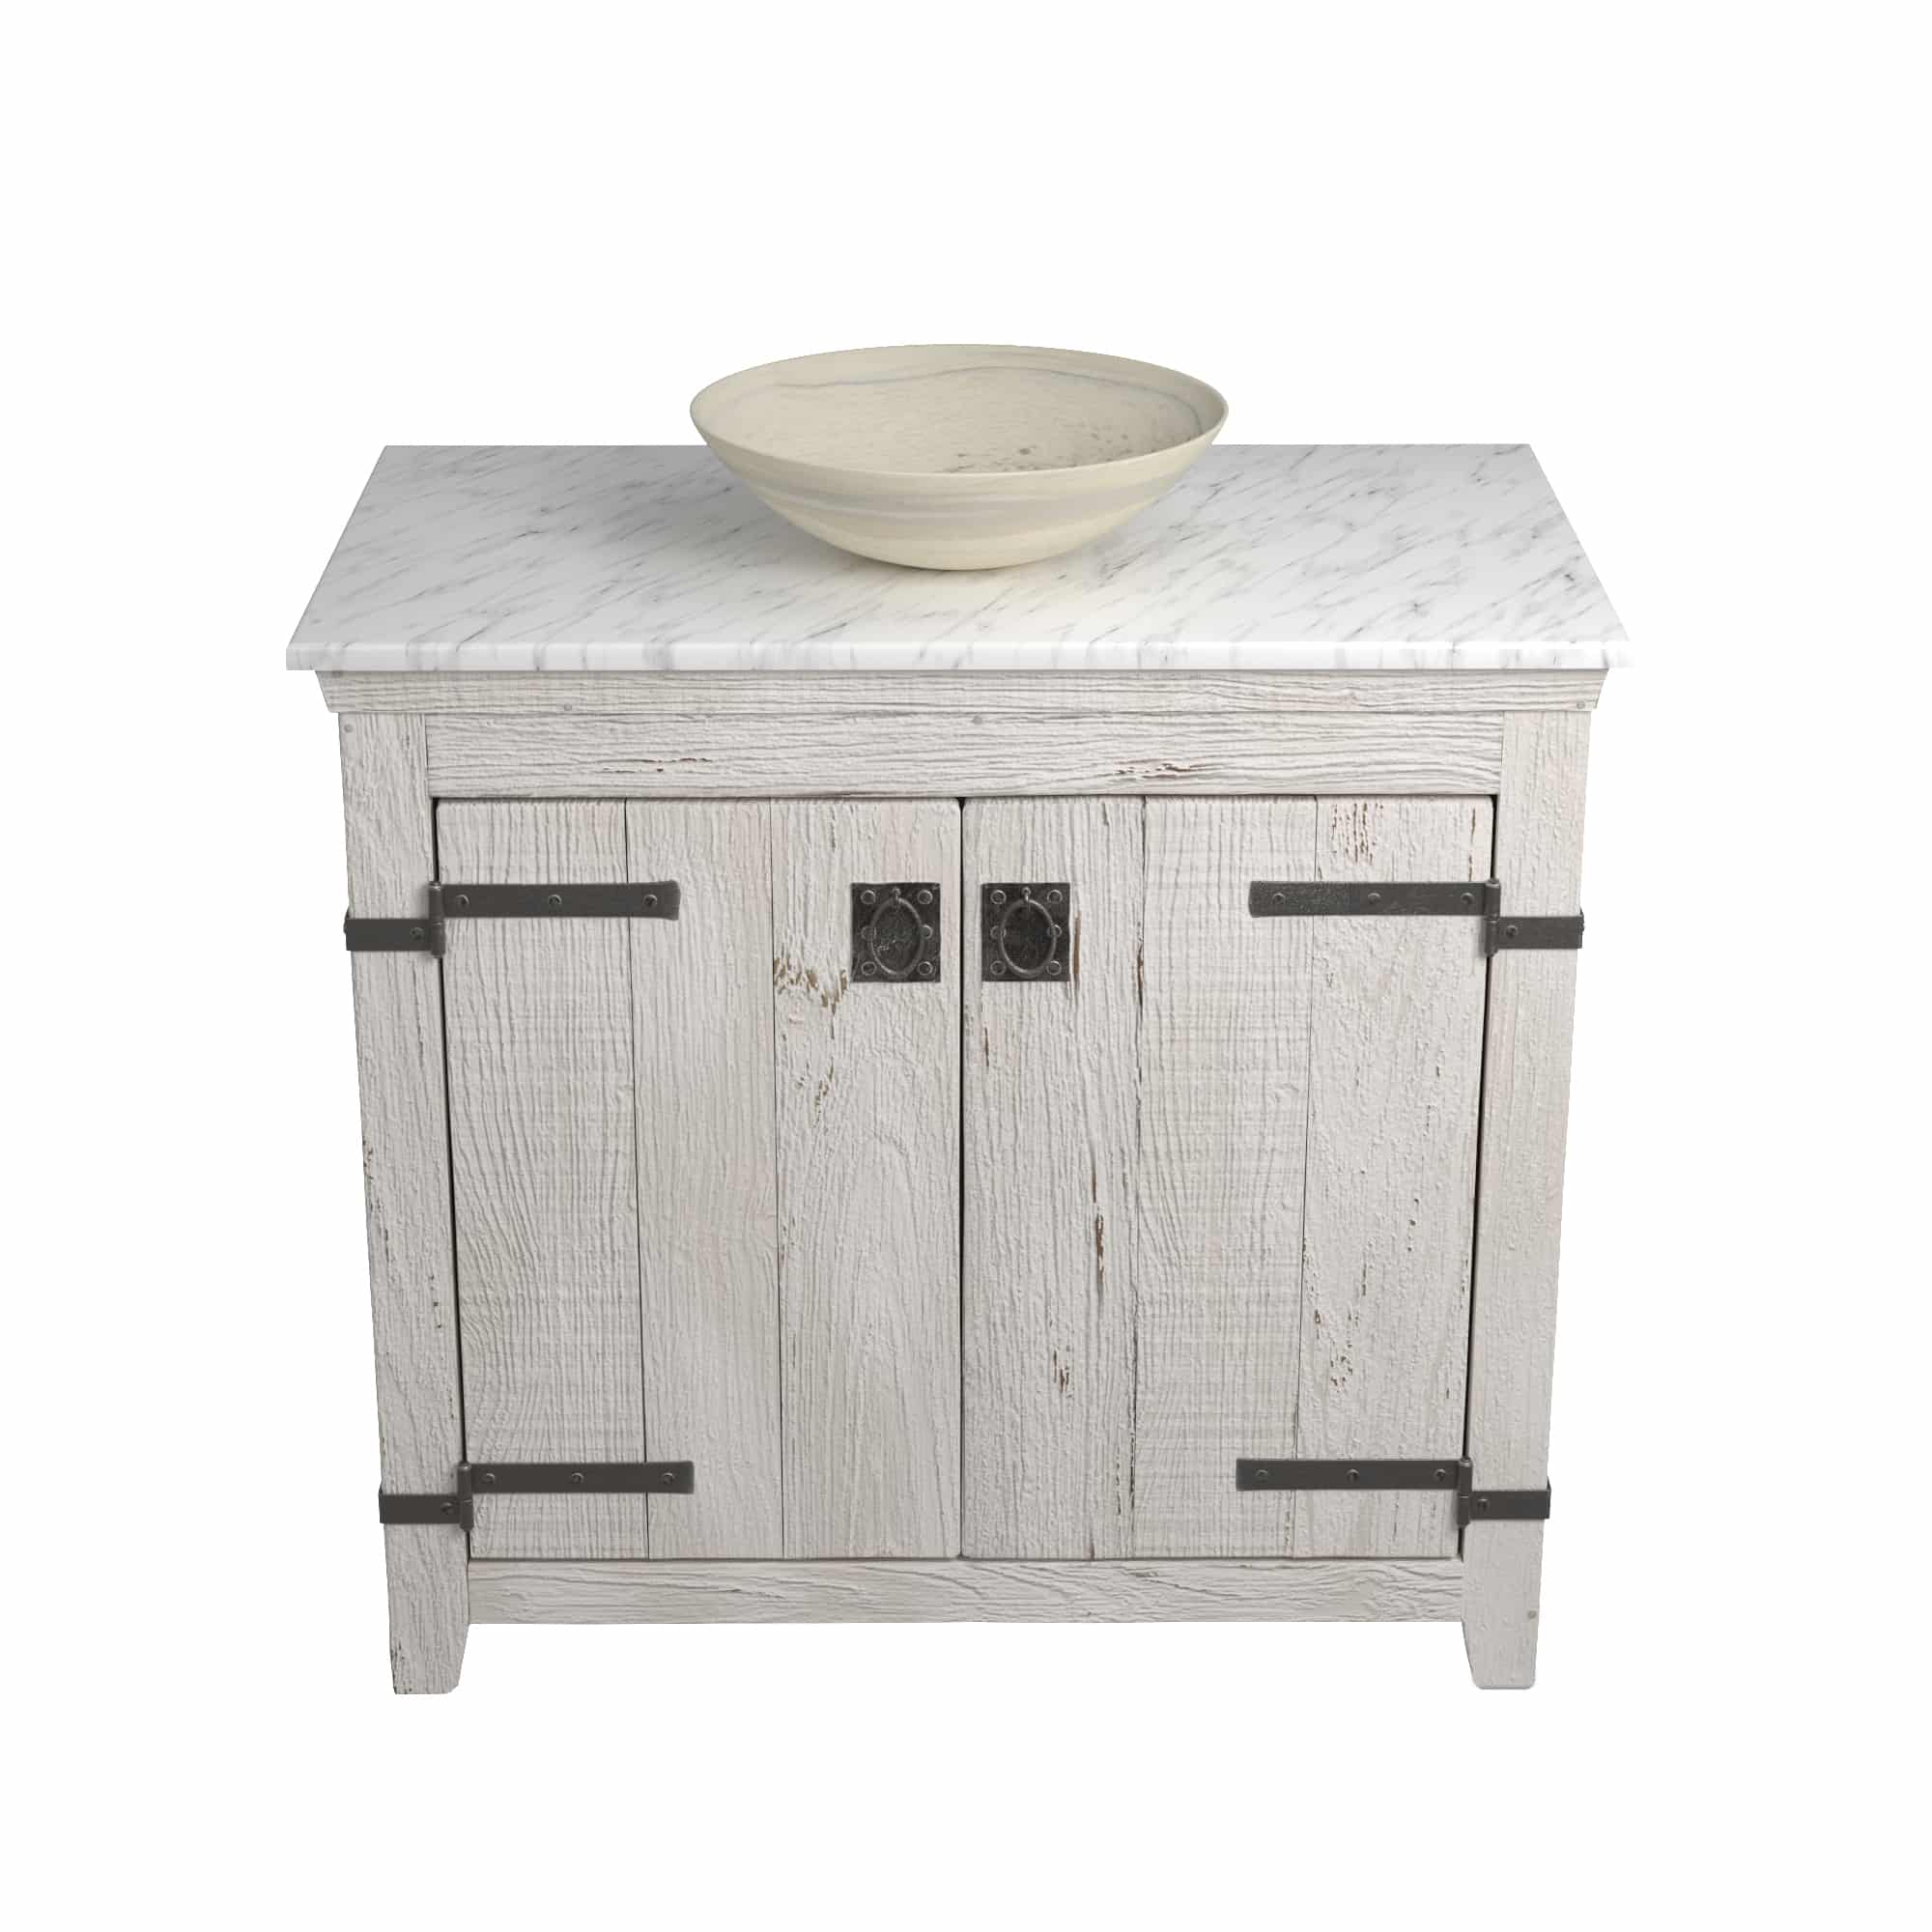 Native Trails 36" Americana Vanity in Whitewash with Carrara Marble Top and Verona in Beachcomber, Single Faucet Hole, BND36-VB-CT-MG-081